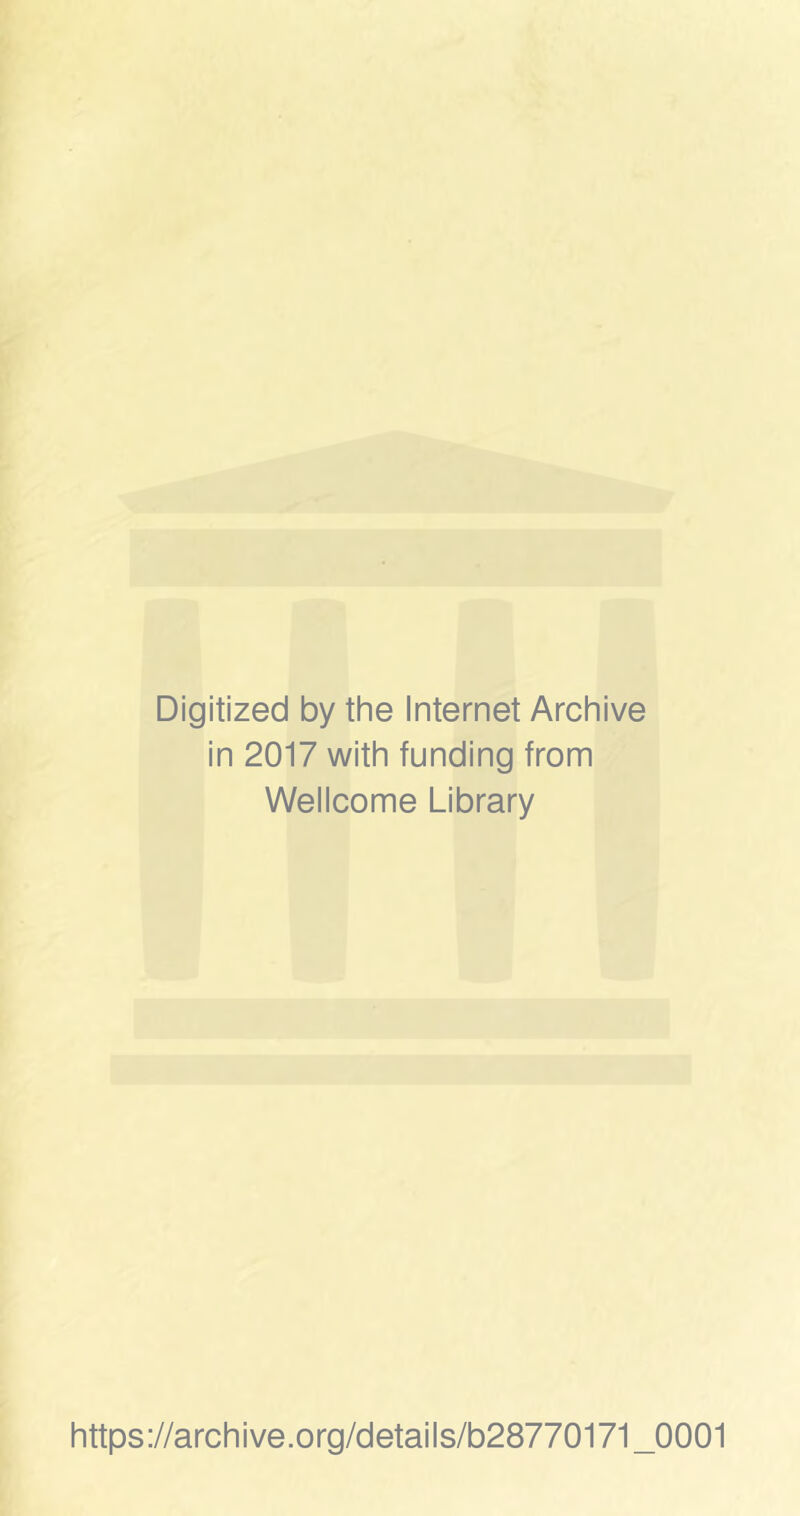 Digitized by the Internet Archive in 2017 with funding from Wellcome Library https://archive.org/details/b28770171_0001